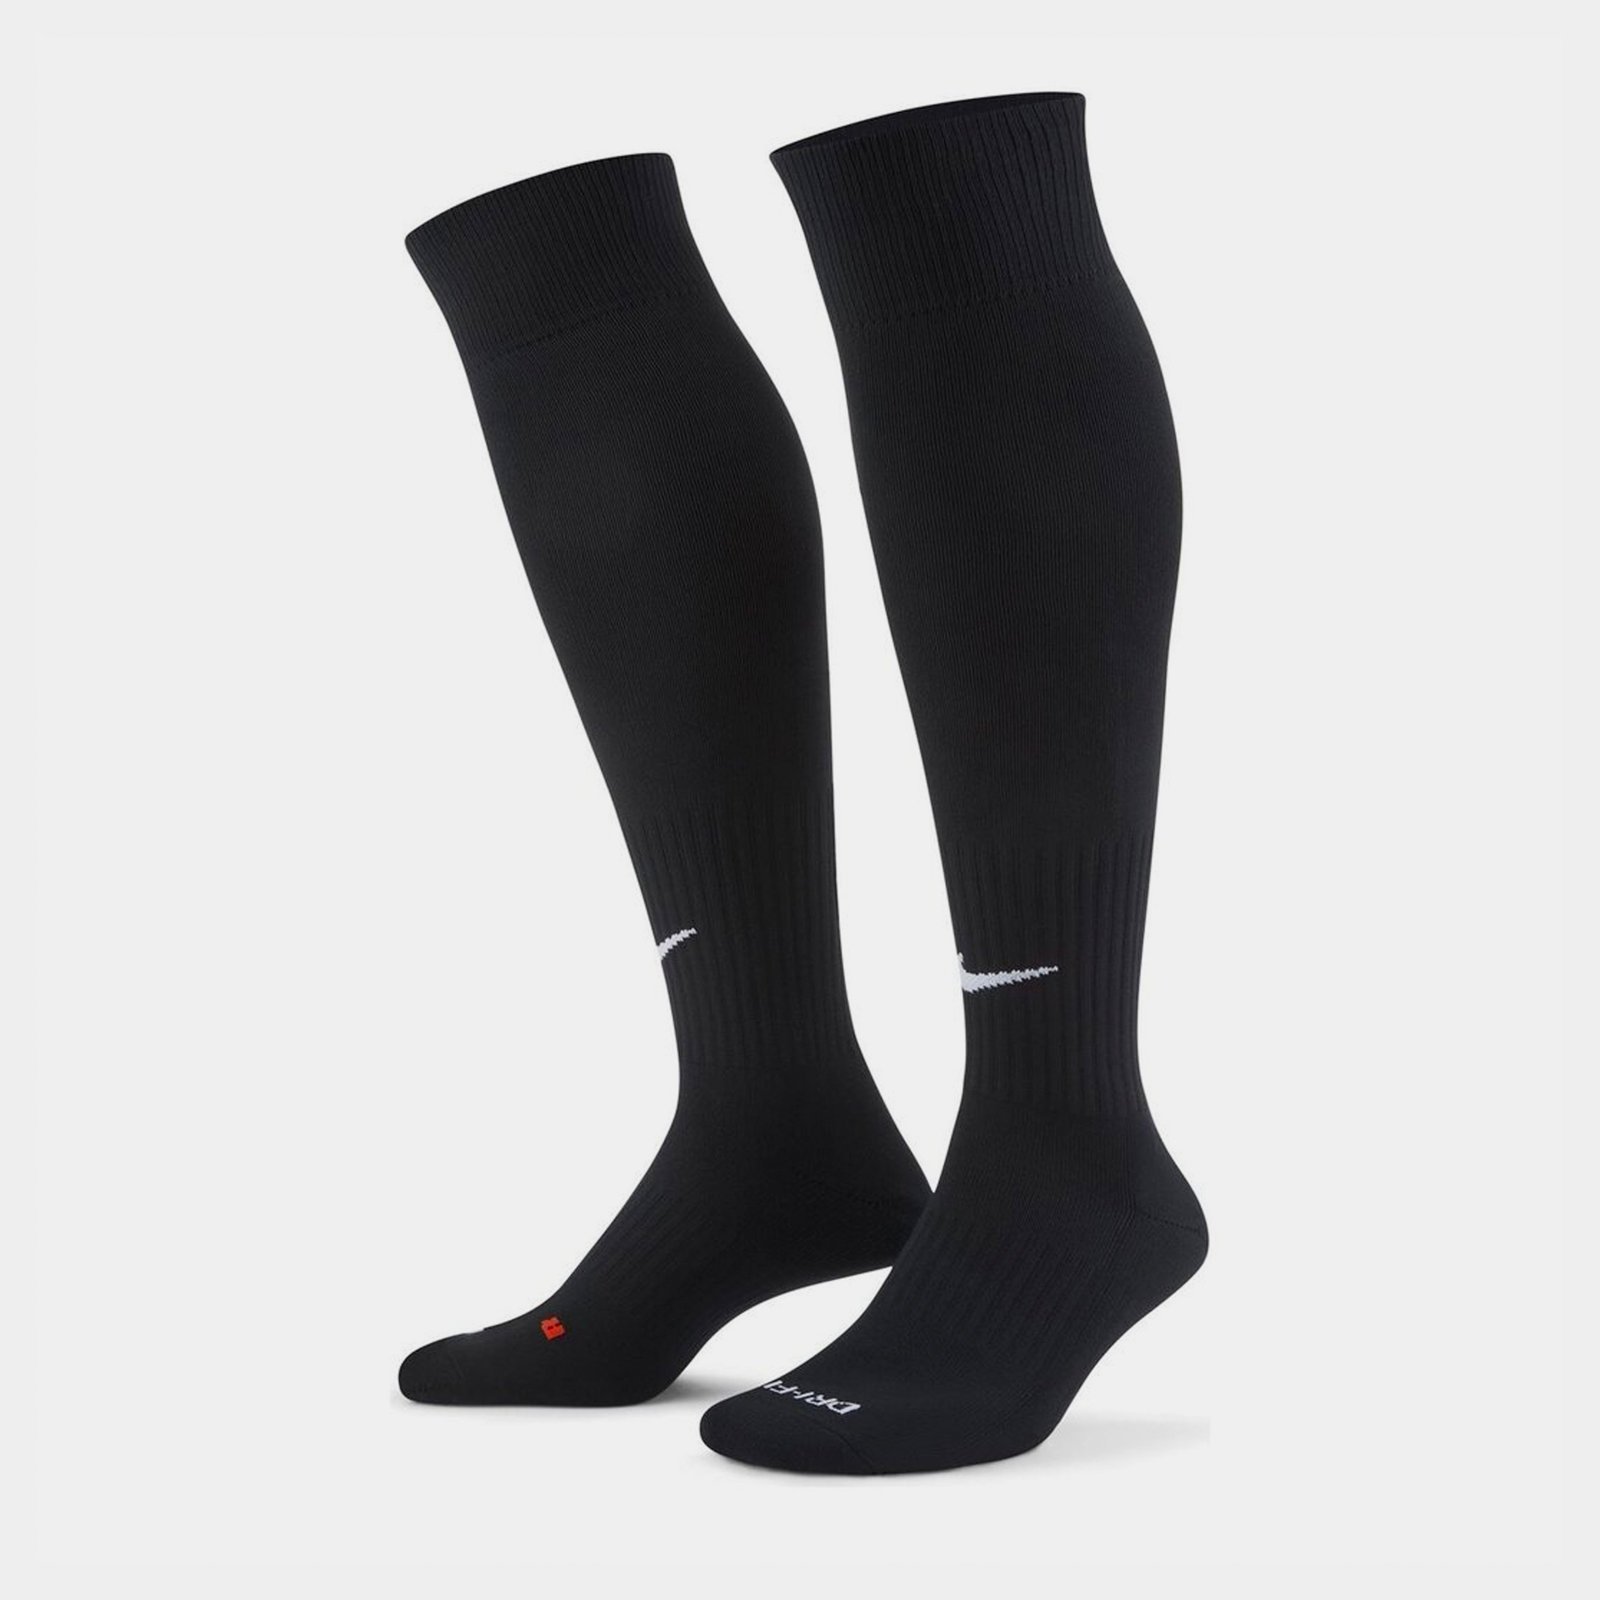 Socks for Rugby - Lovell Rugby